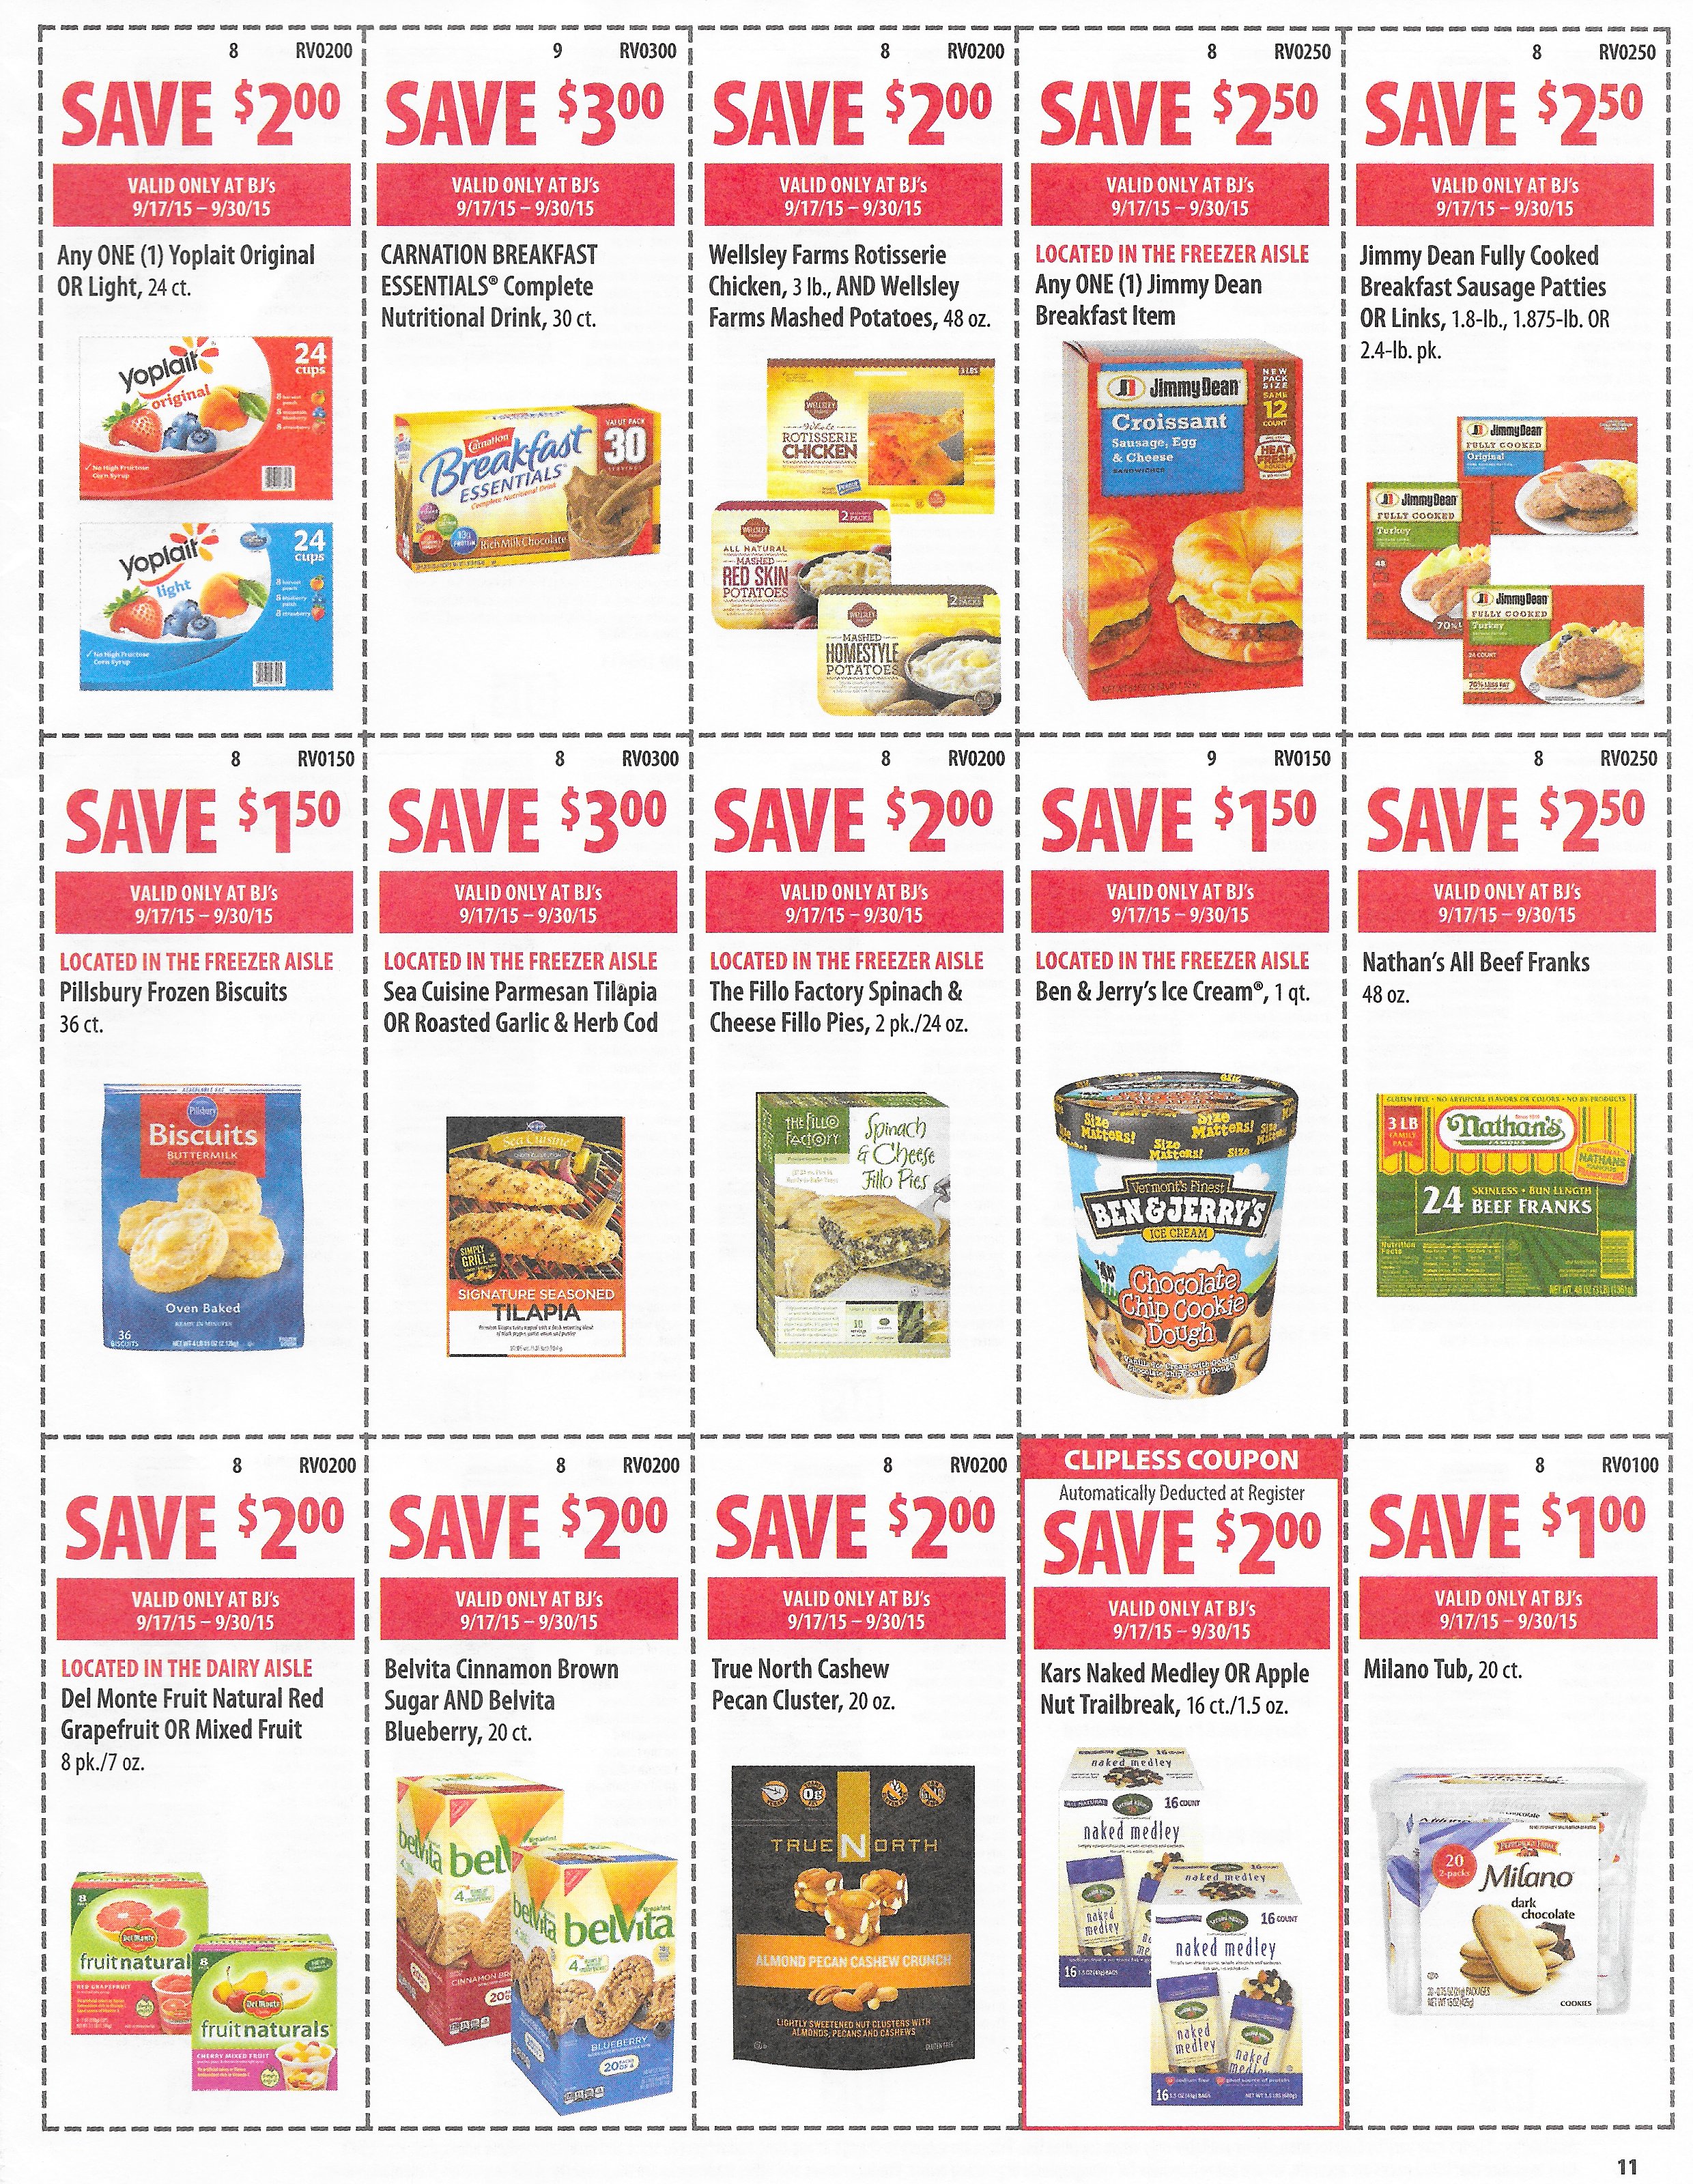 BJ’s Front of Door Coupons 9/17 9/30 Ship Saves